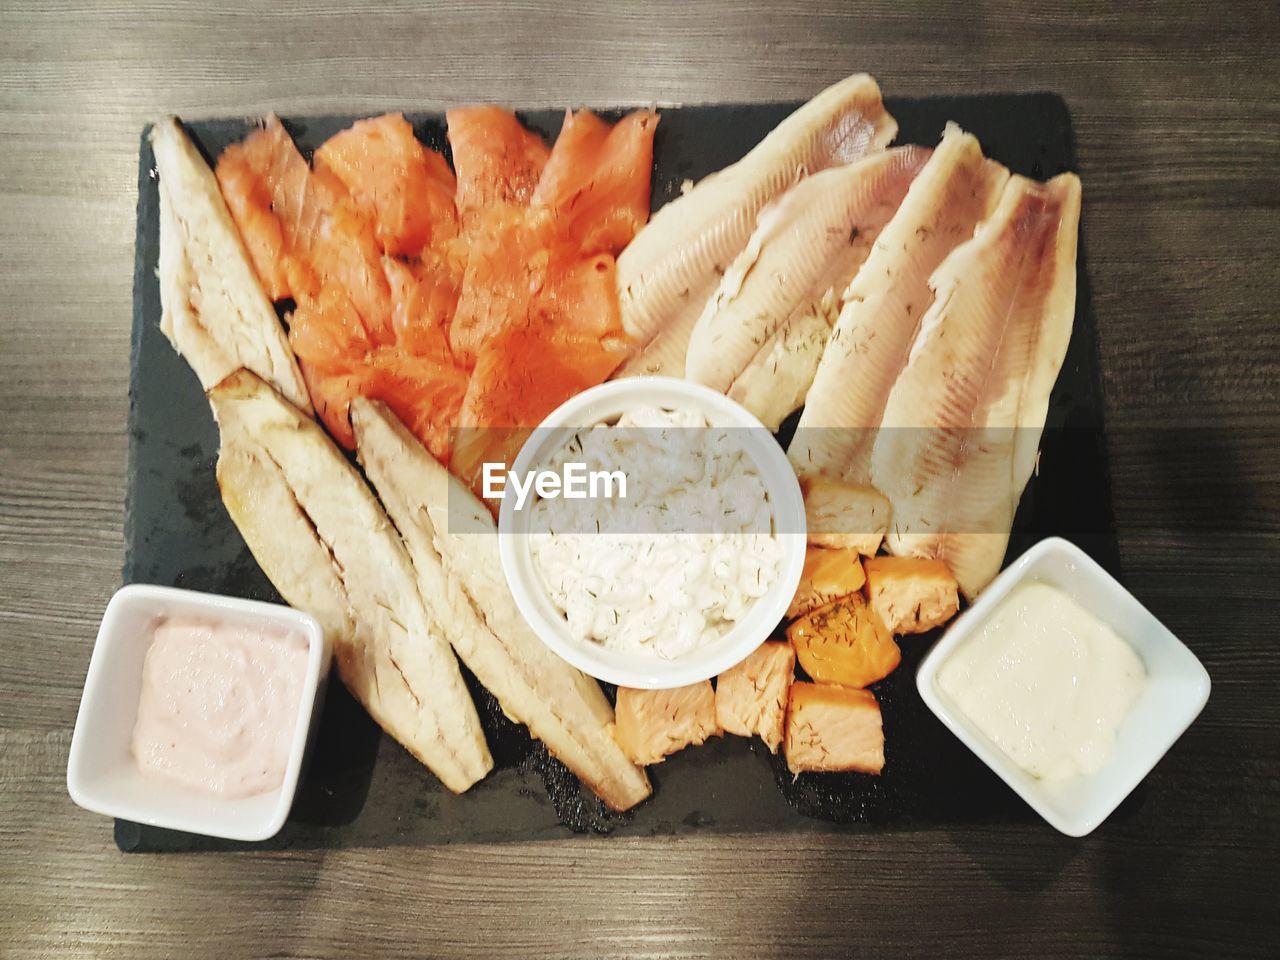 HIGH ANGLE VIEW OF FOOD IN CONTAINER ON TABLE